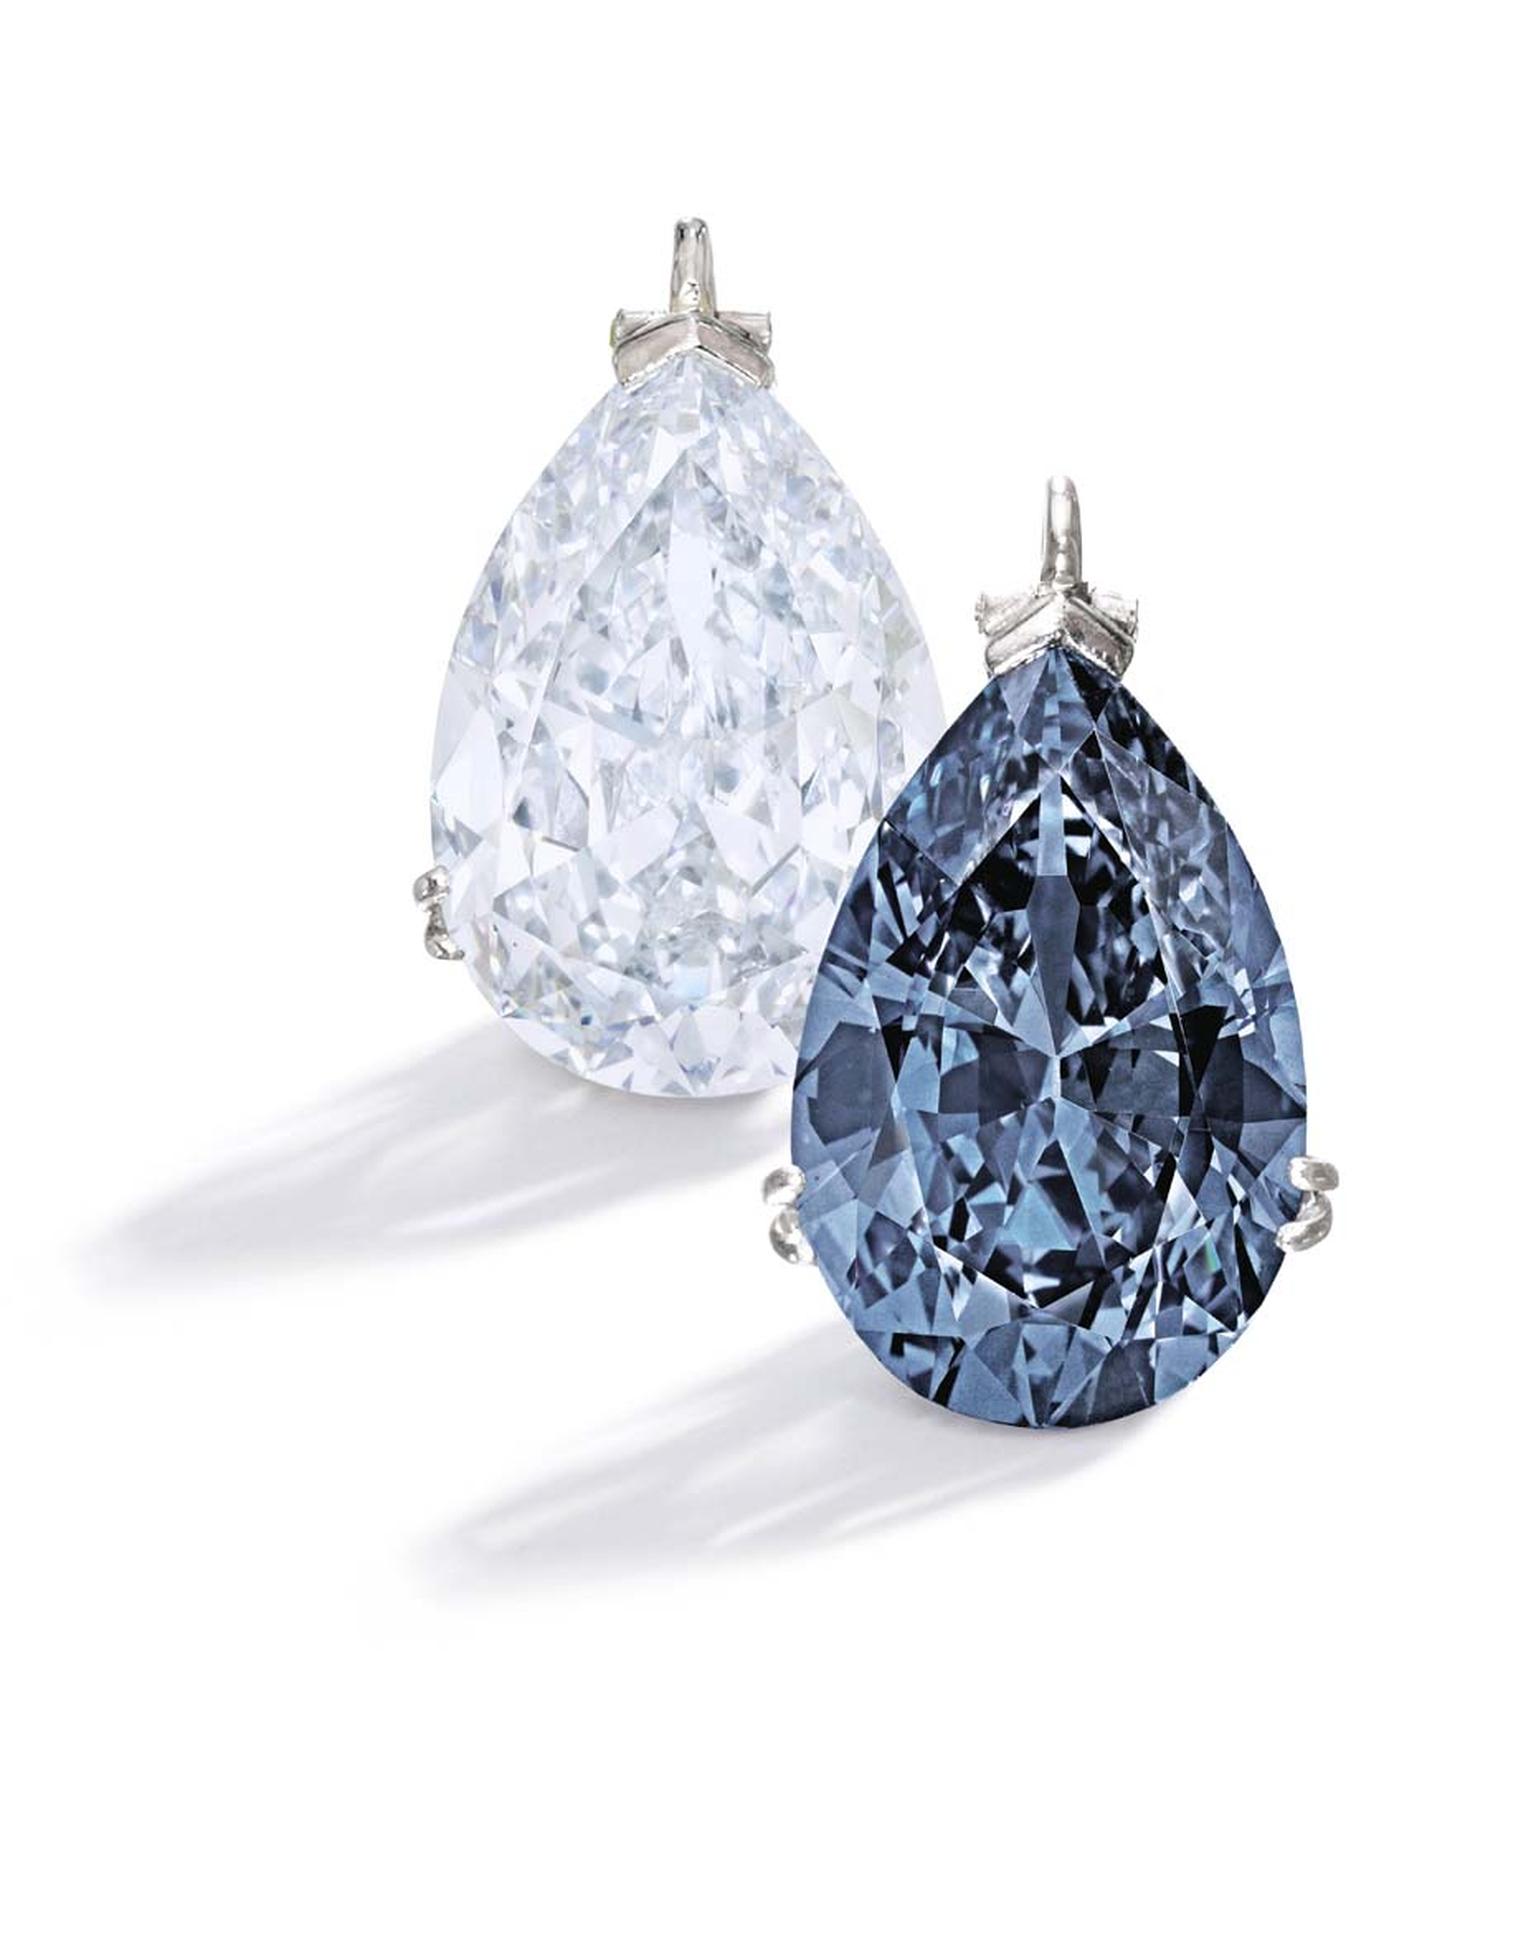 Bunny Mellon's jewelry collection, which will be auctioned by Sotheby's New York on 20 November 2014, includes two platinum mounted blue diamond pendants. One is an important 9.15ct Fancy Blue diamond, left, and the other a magnificent and rare 9.74ct Fan